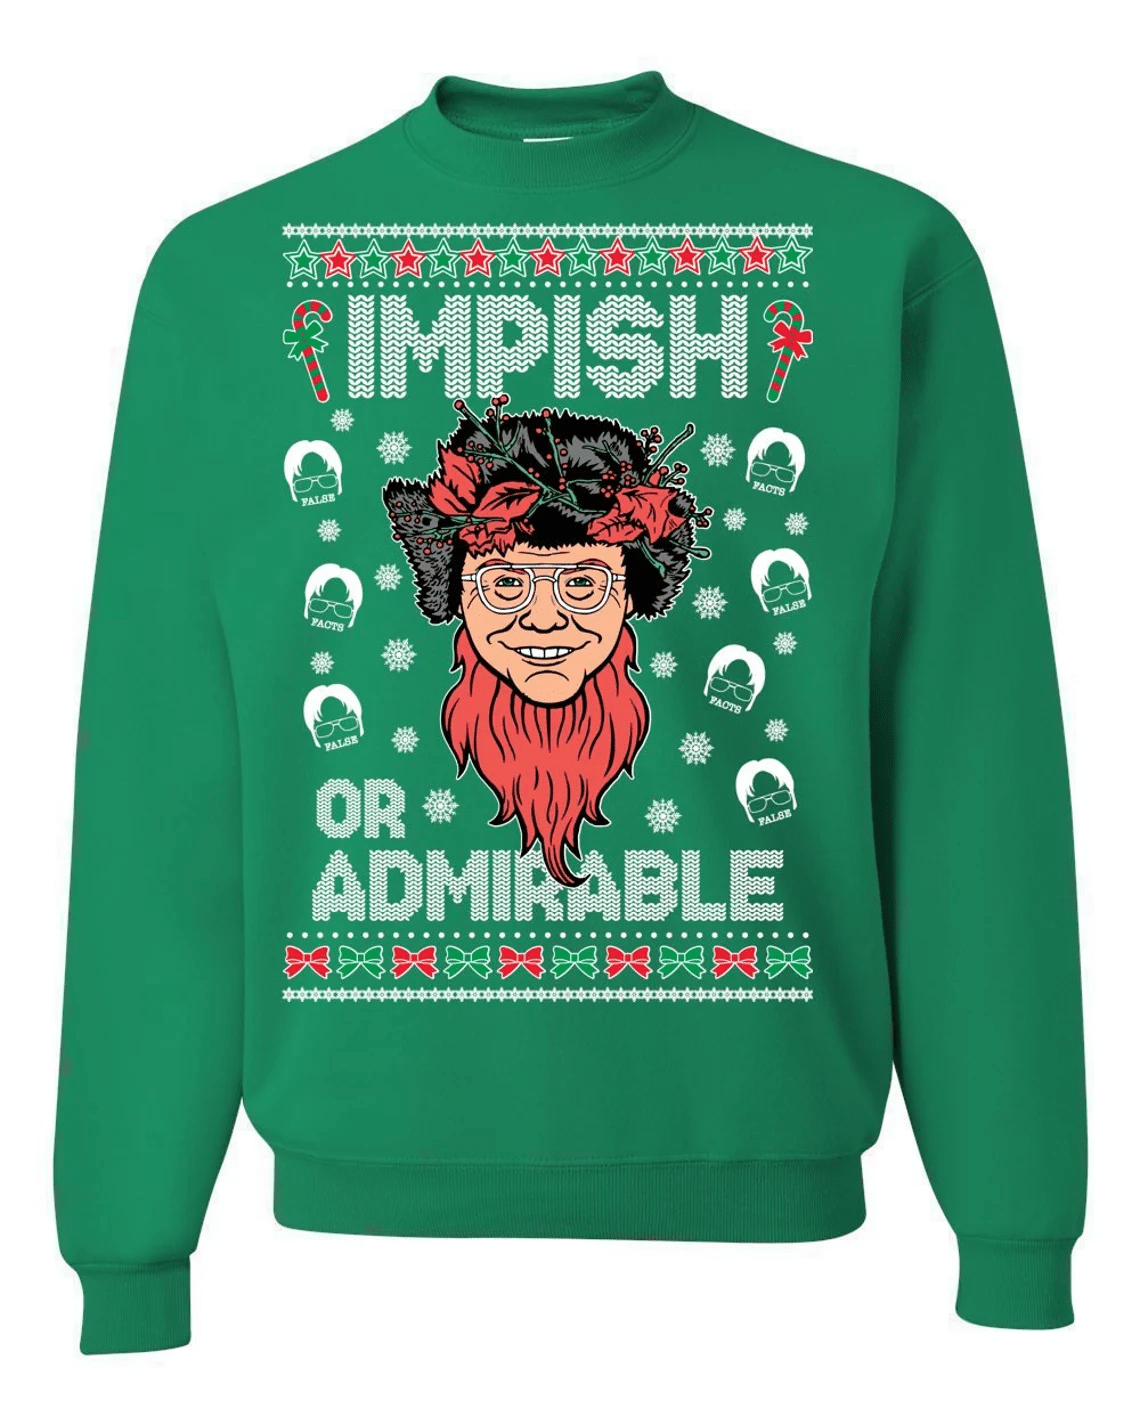 The Office Belsnickel Impish or Admirable Christmas Sweatshirt Style: Sweatshirt, Color: Green